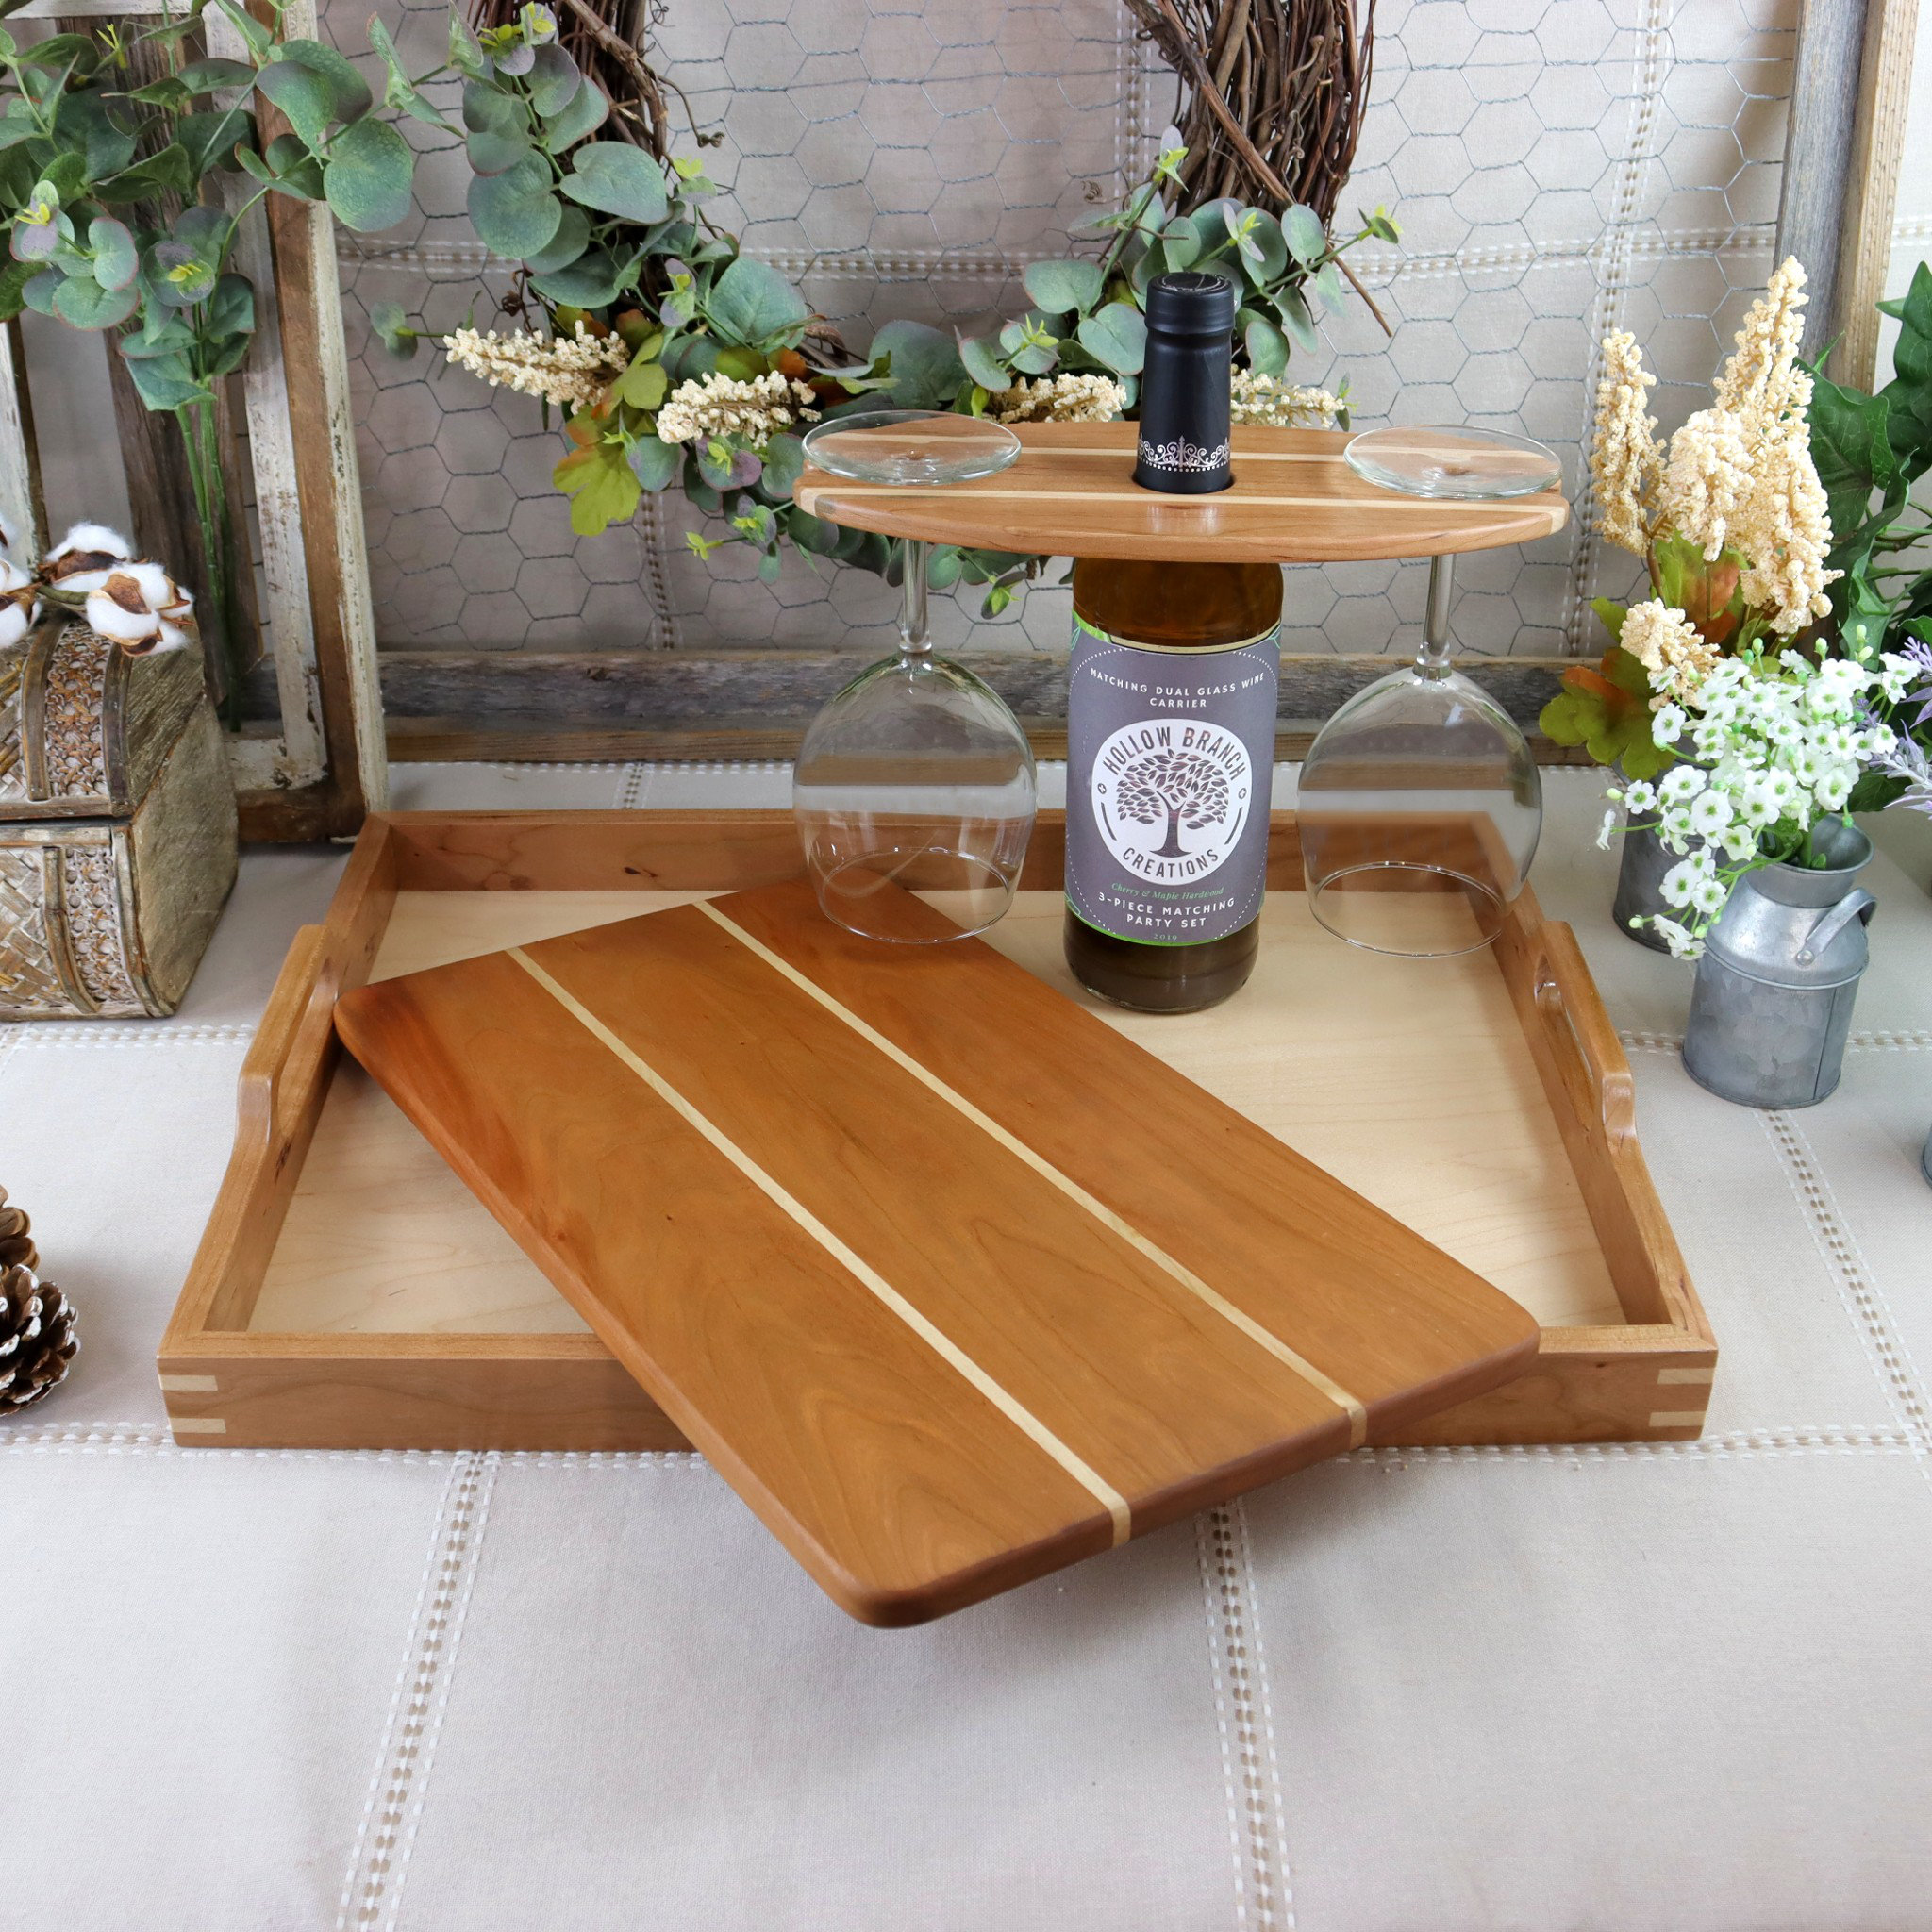 3-Piece Serving Set: Handcrafted Matching Serving Tray, Cutting Board, & Wine Bottle Holder Carrier Hollow Branch Creations Color: Light Brown